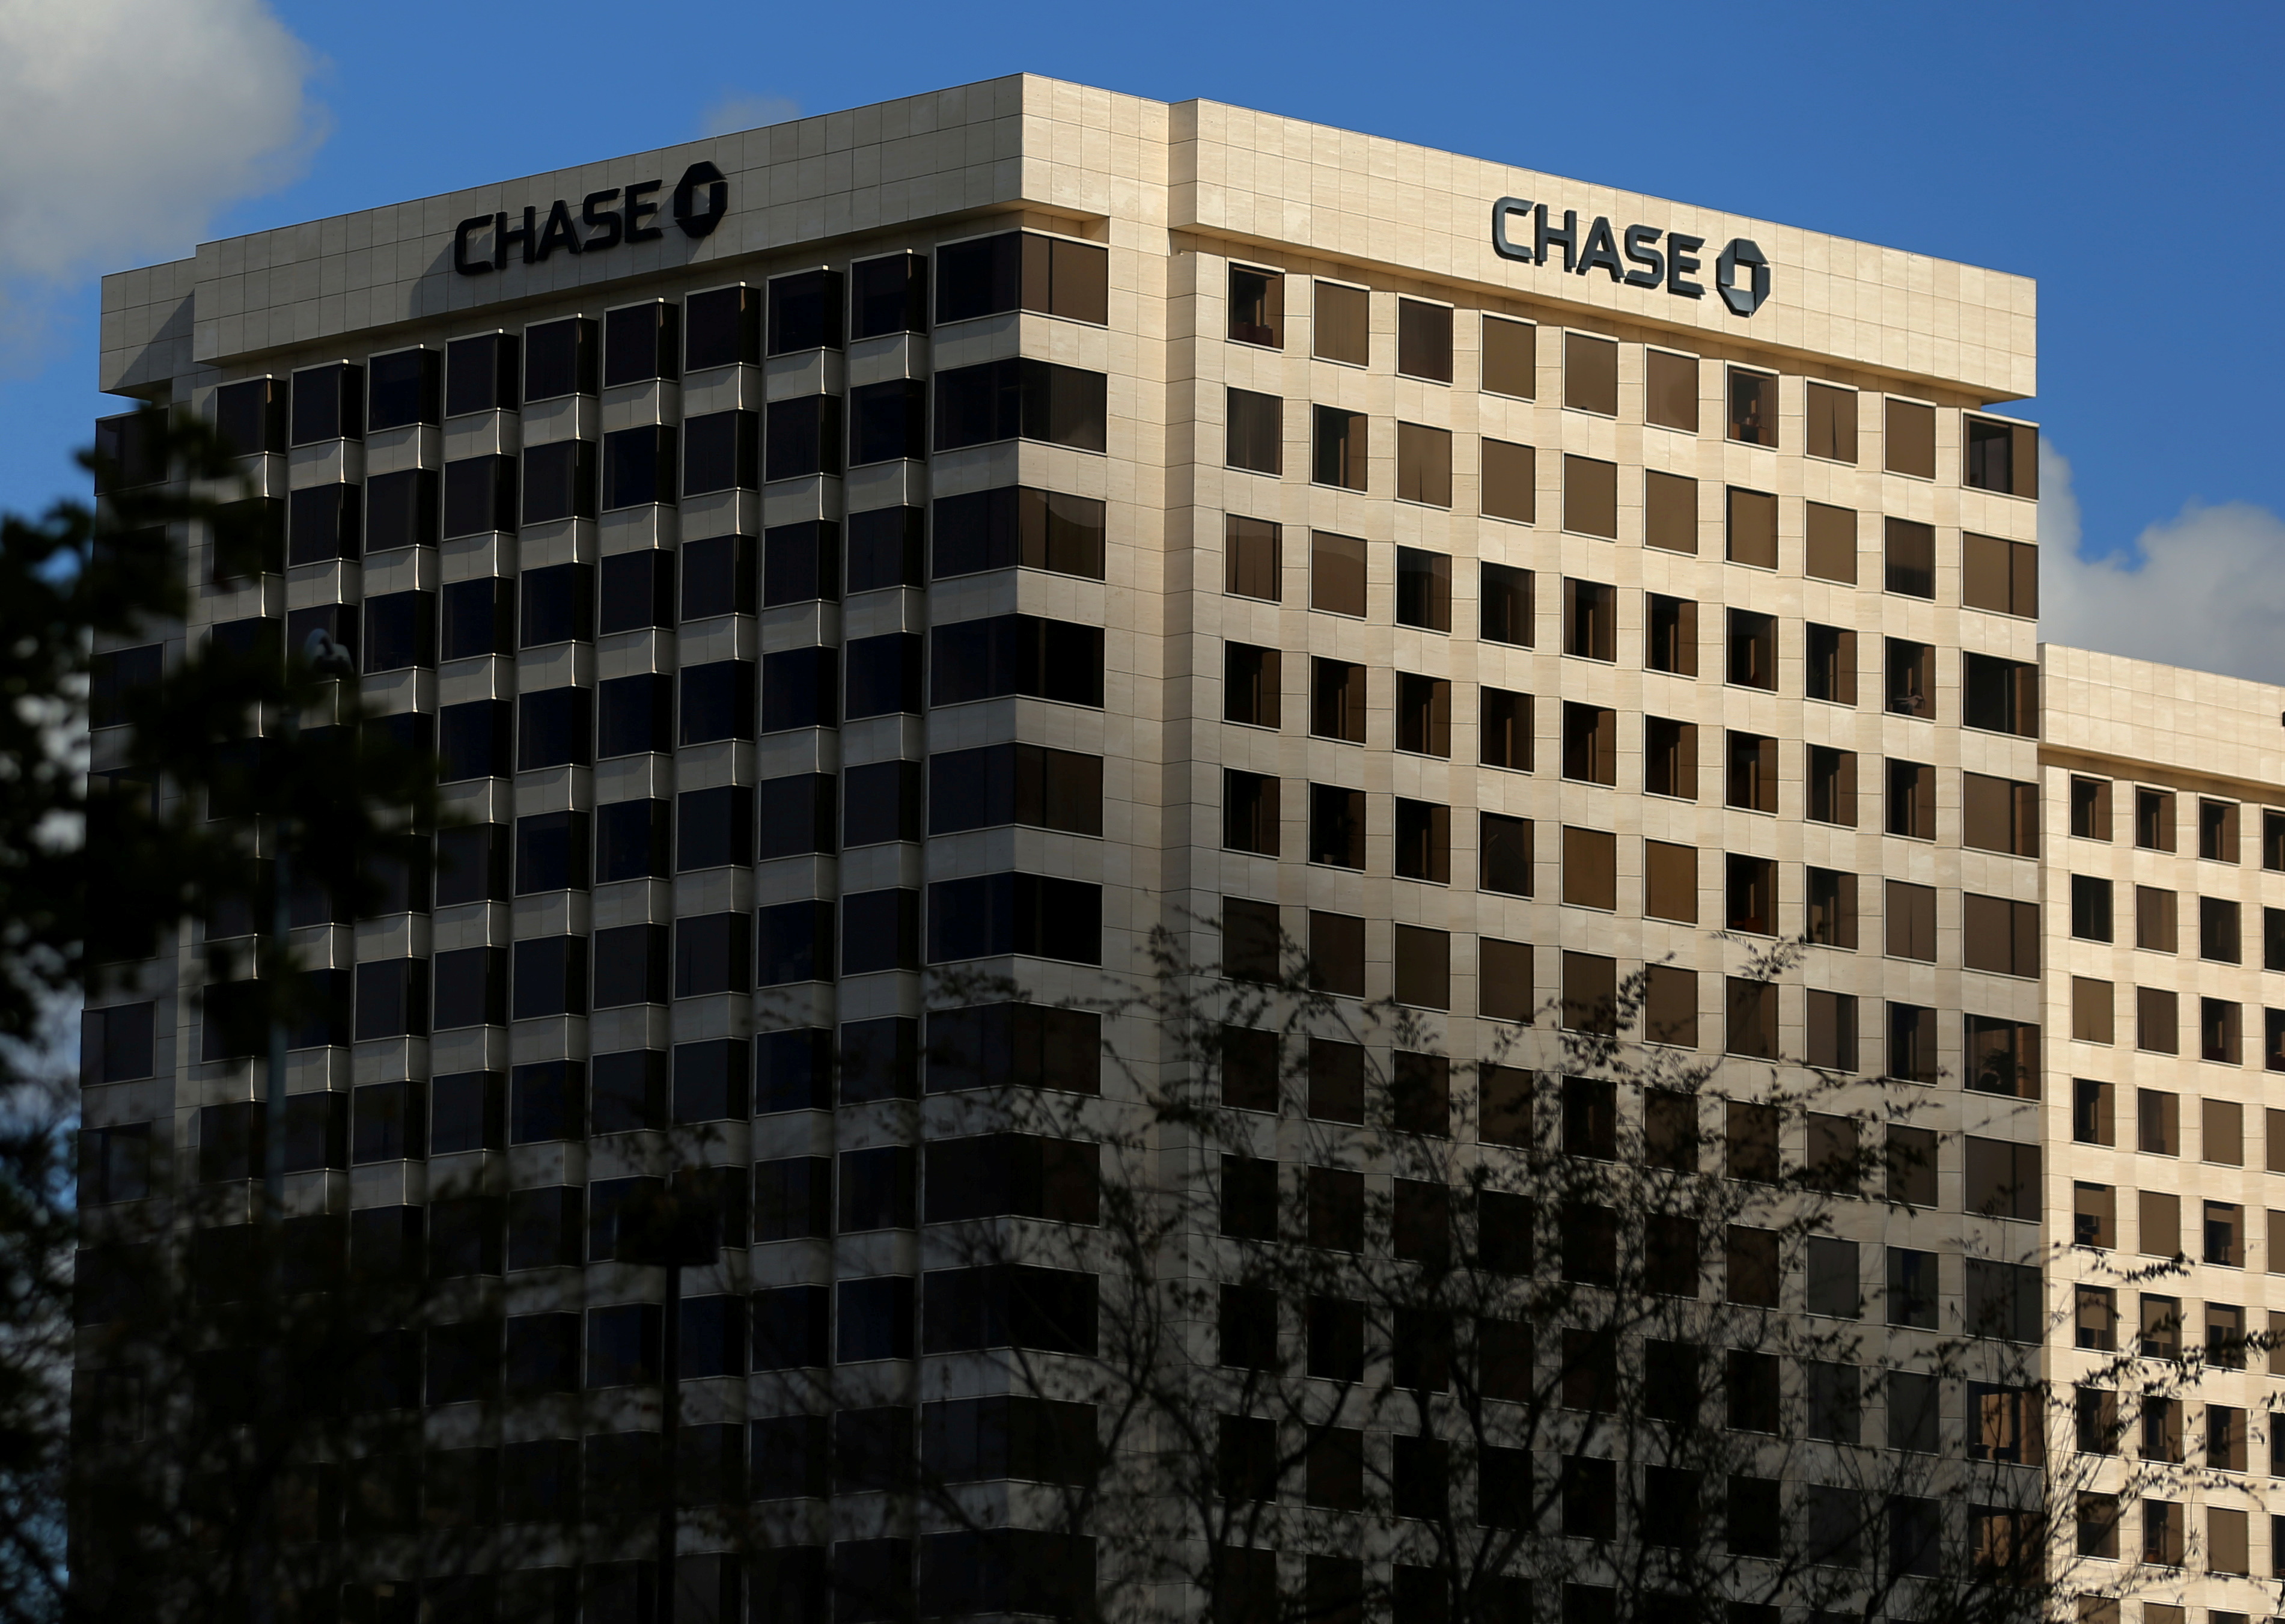 A JPMorgan Chase & Co building is shown in Irvine, California